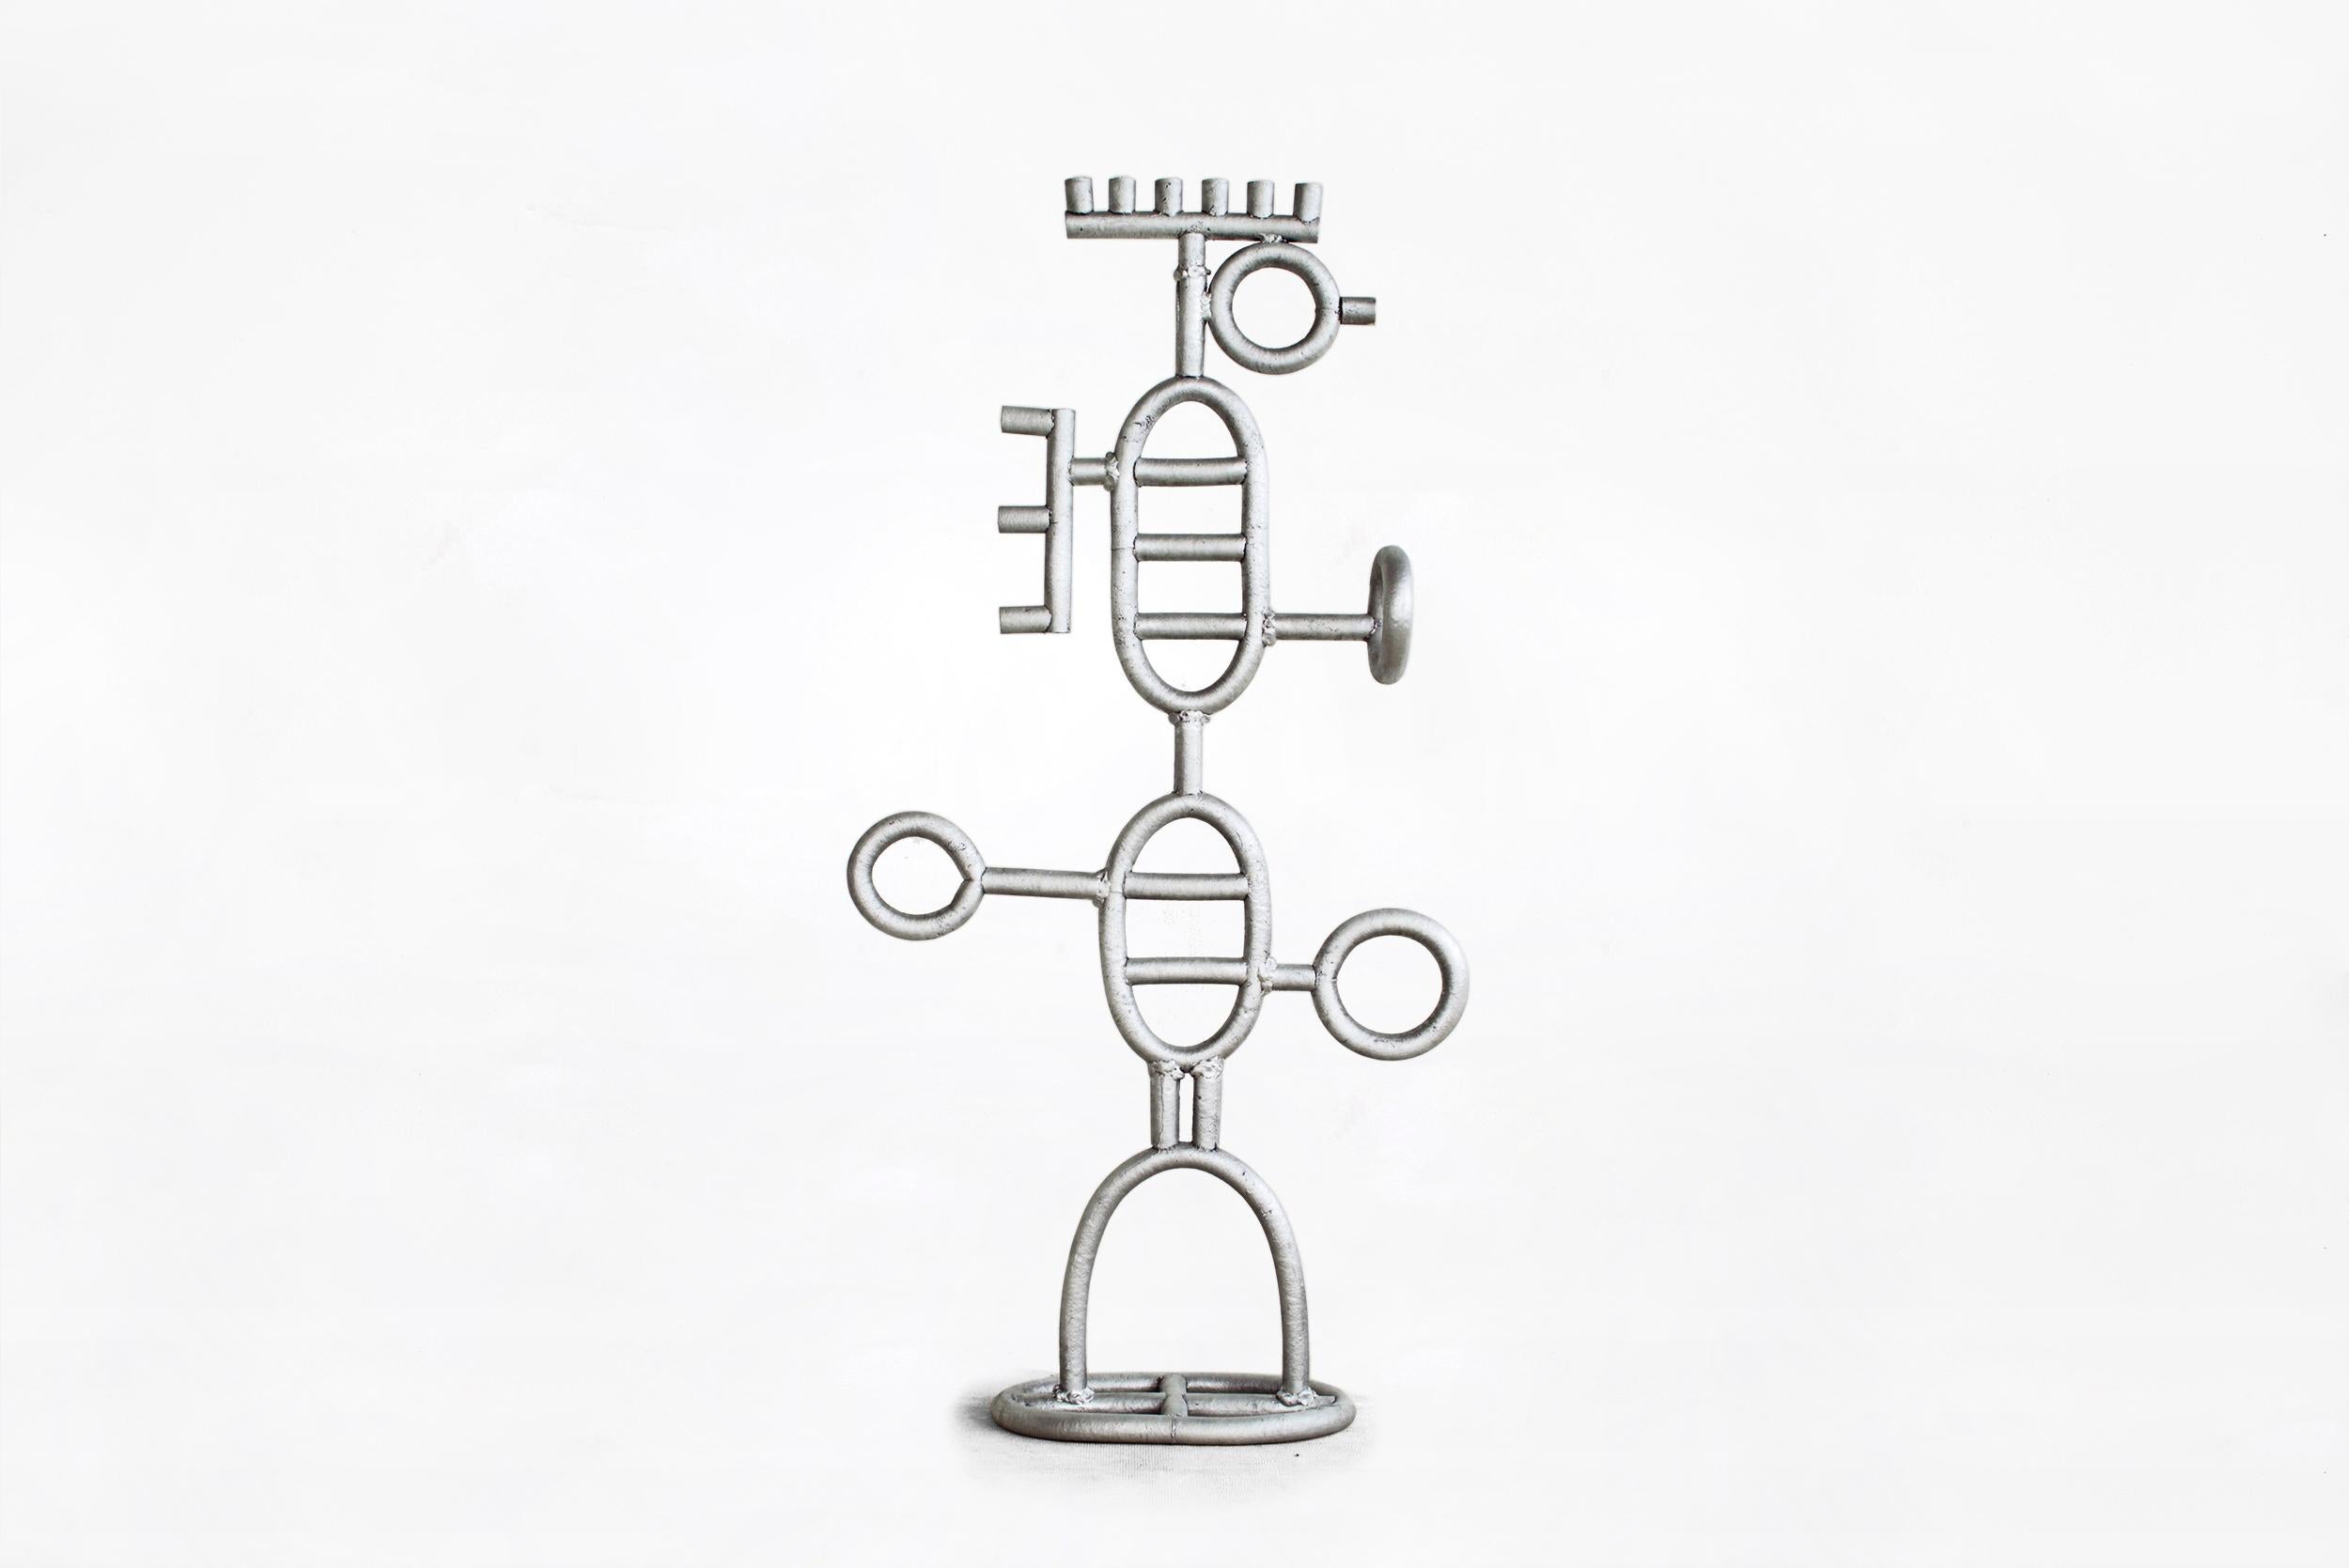 Modern Sigve Knutson Cast Aluminium Hanger, Manufactured by Sigve Knutson Oslo, 2019 For Sale